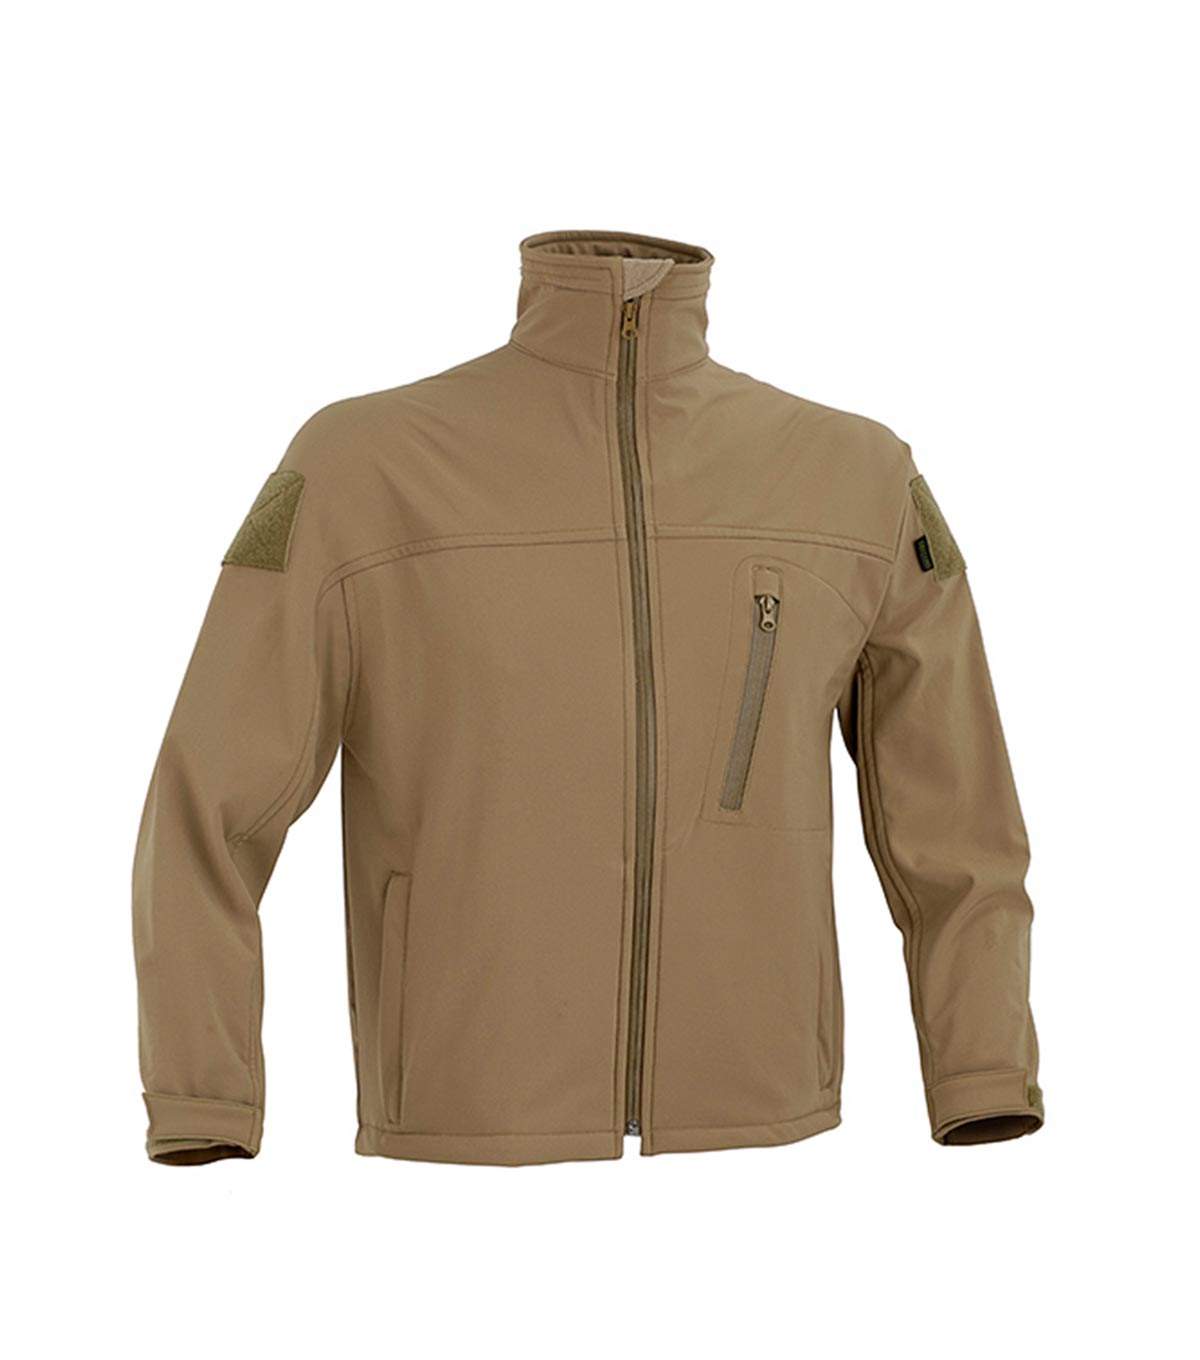 DEFCON 5 SOFT SHELL JACKET - D5-3052 - Discontinued - Defcon 5 Italy